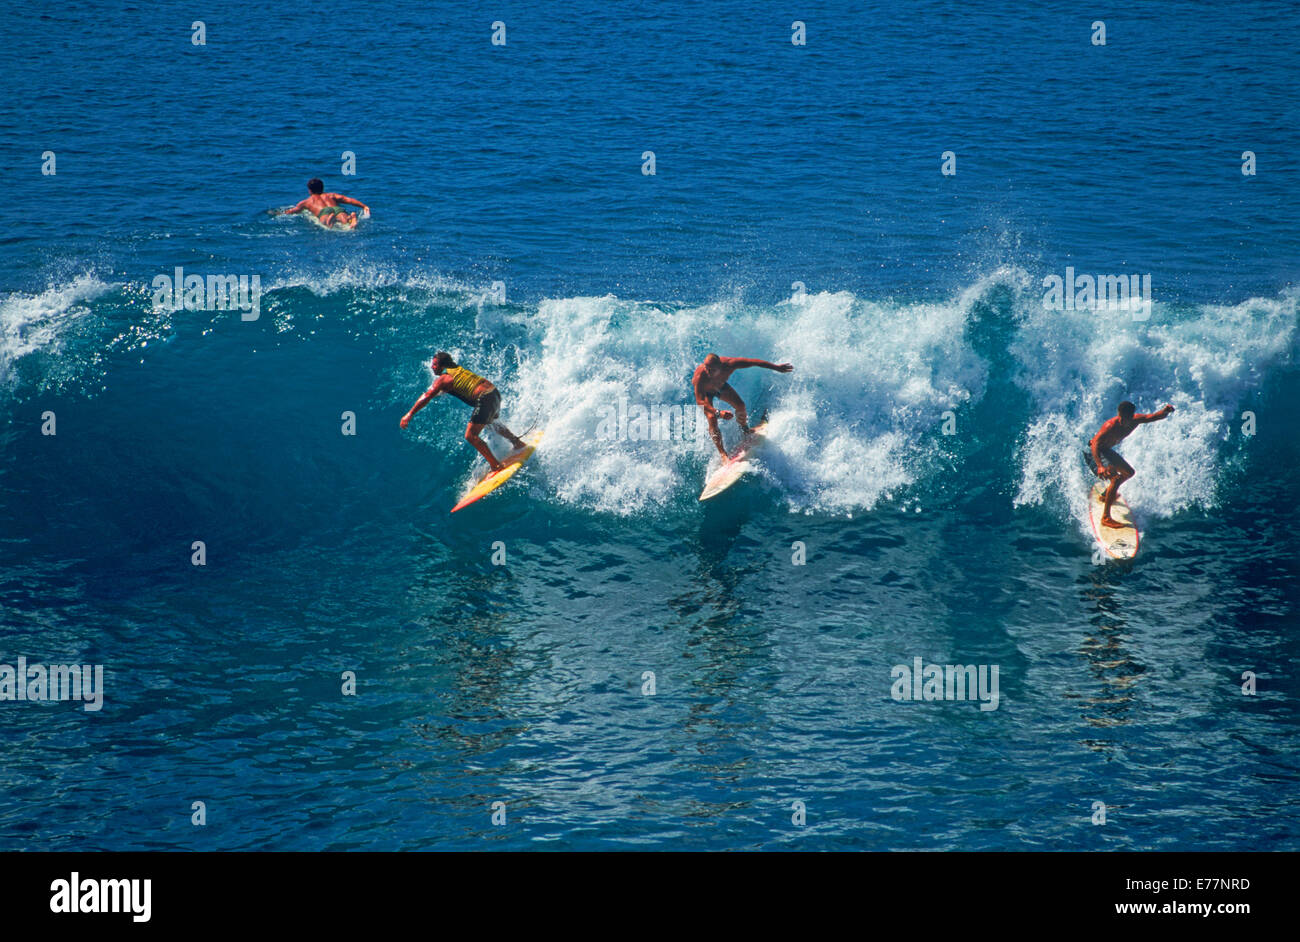 Three surfers riding same wave or dropping into wave in Southern California Stock Photo